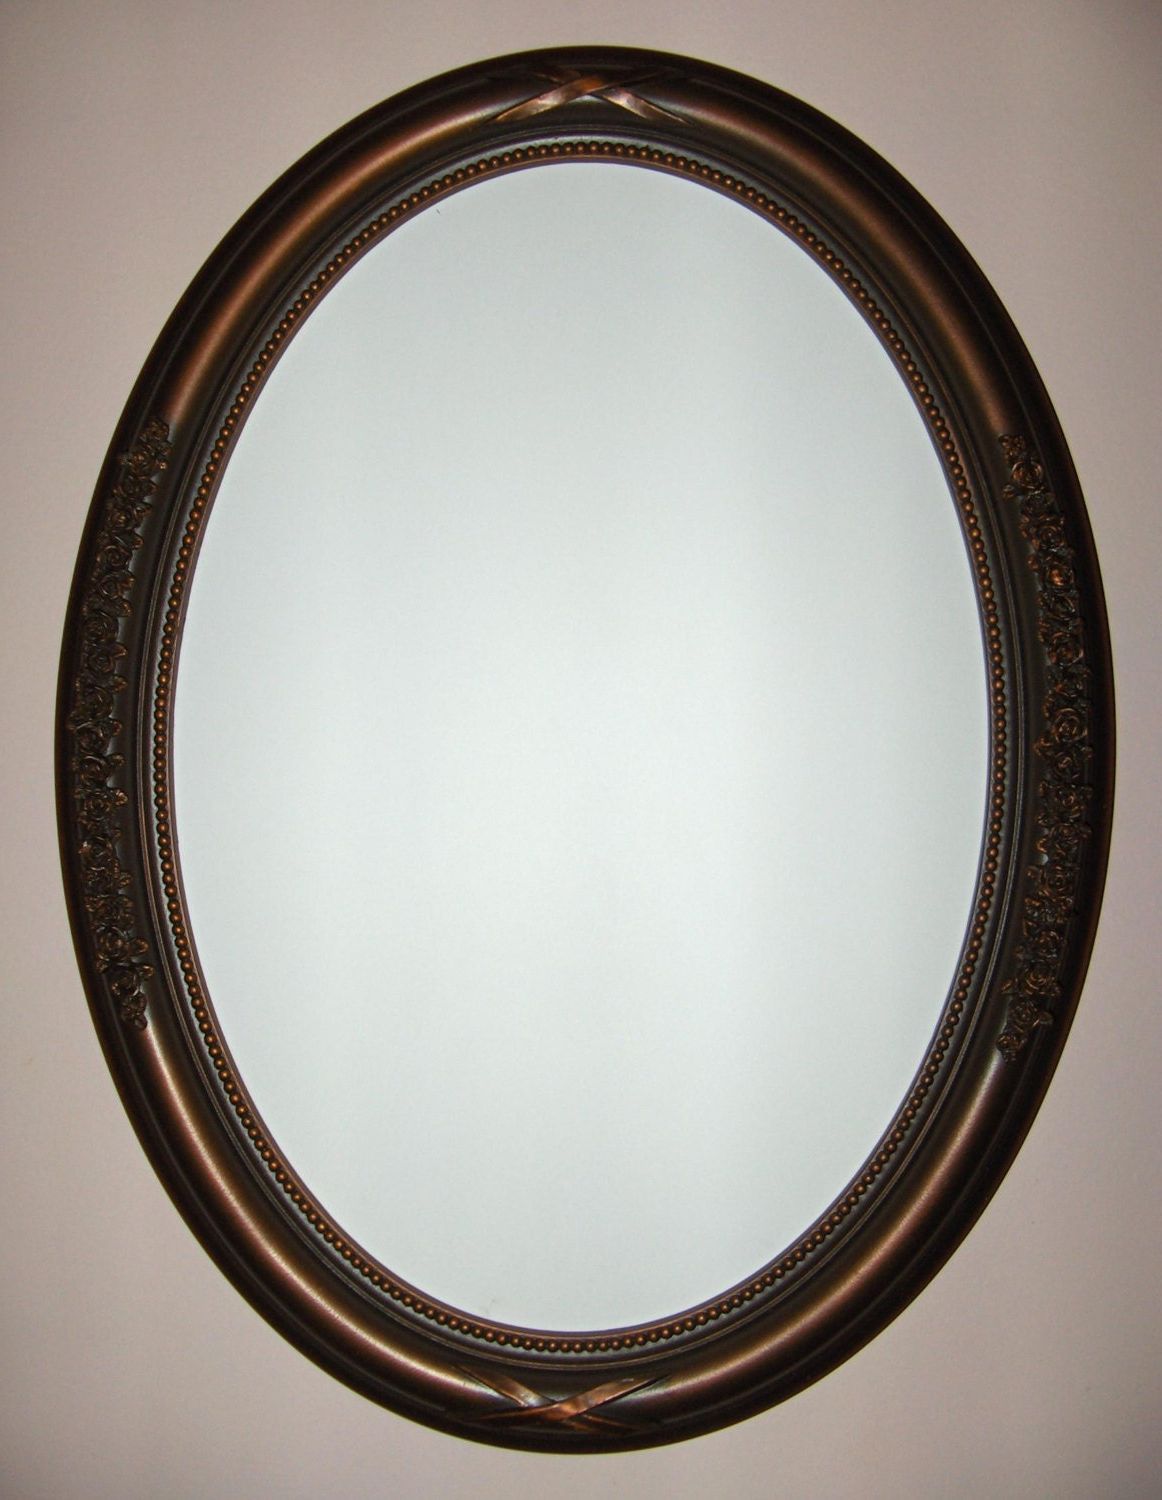 Recent Oil Rubbed Bronze Oval Wall Mirrors For Oval Mirror With Oil Rubbed Bronze Color Frame (View 12 of 15)